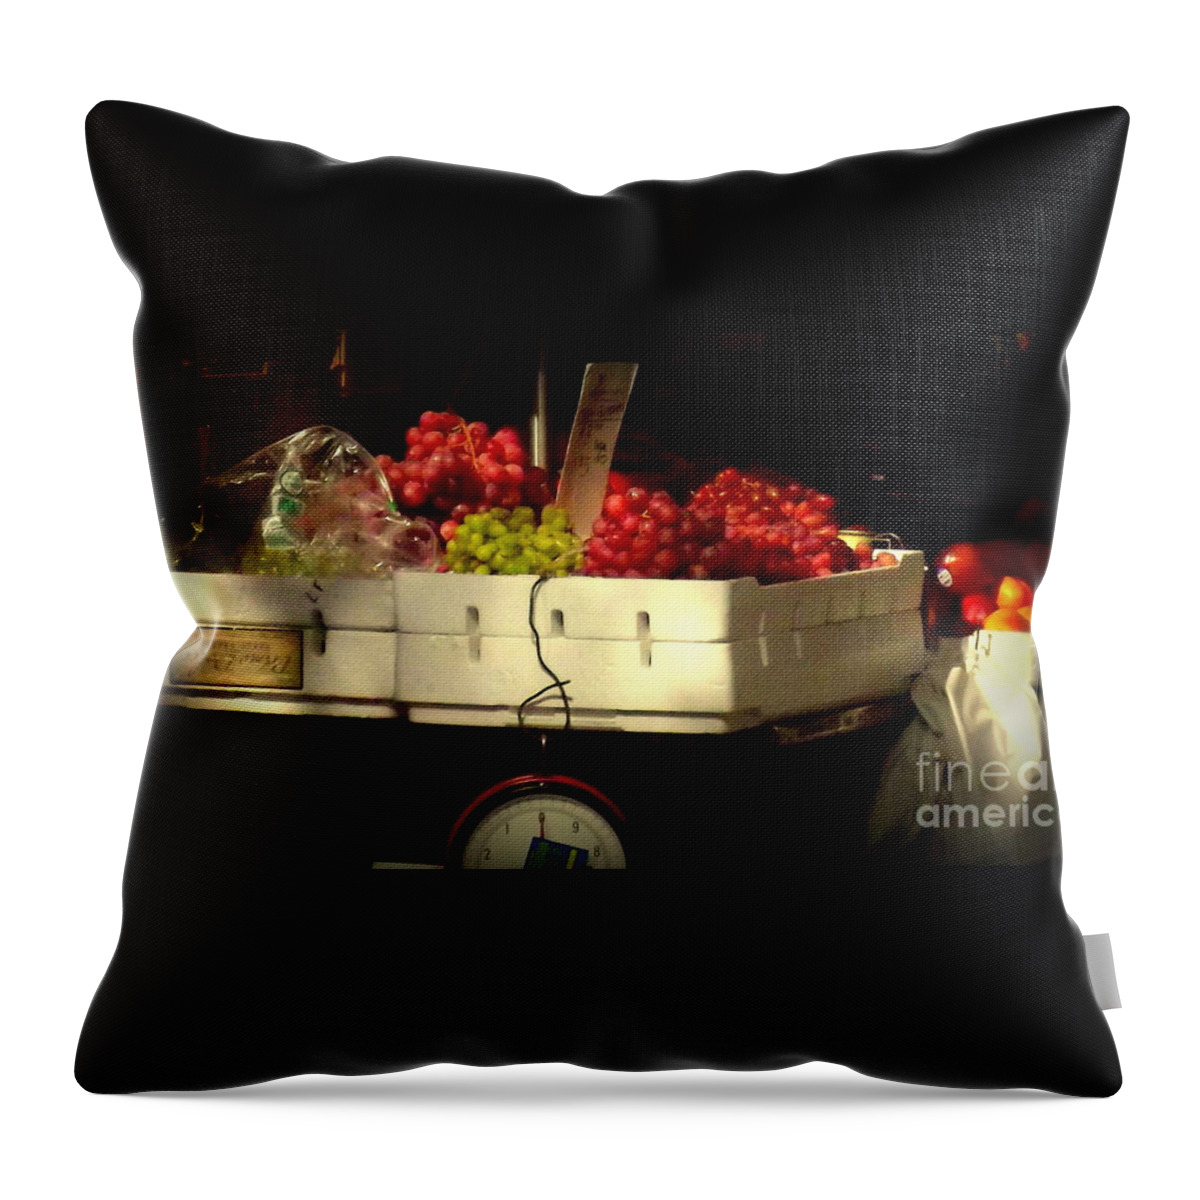 Fruits And Vegetables Throw Pillow featuring the photograph Grapes with Weighing Scale by Miriam Danar